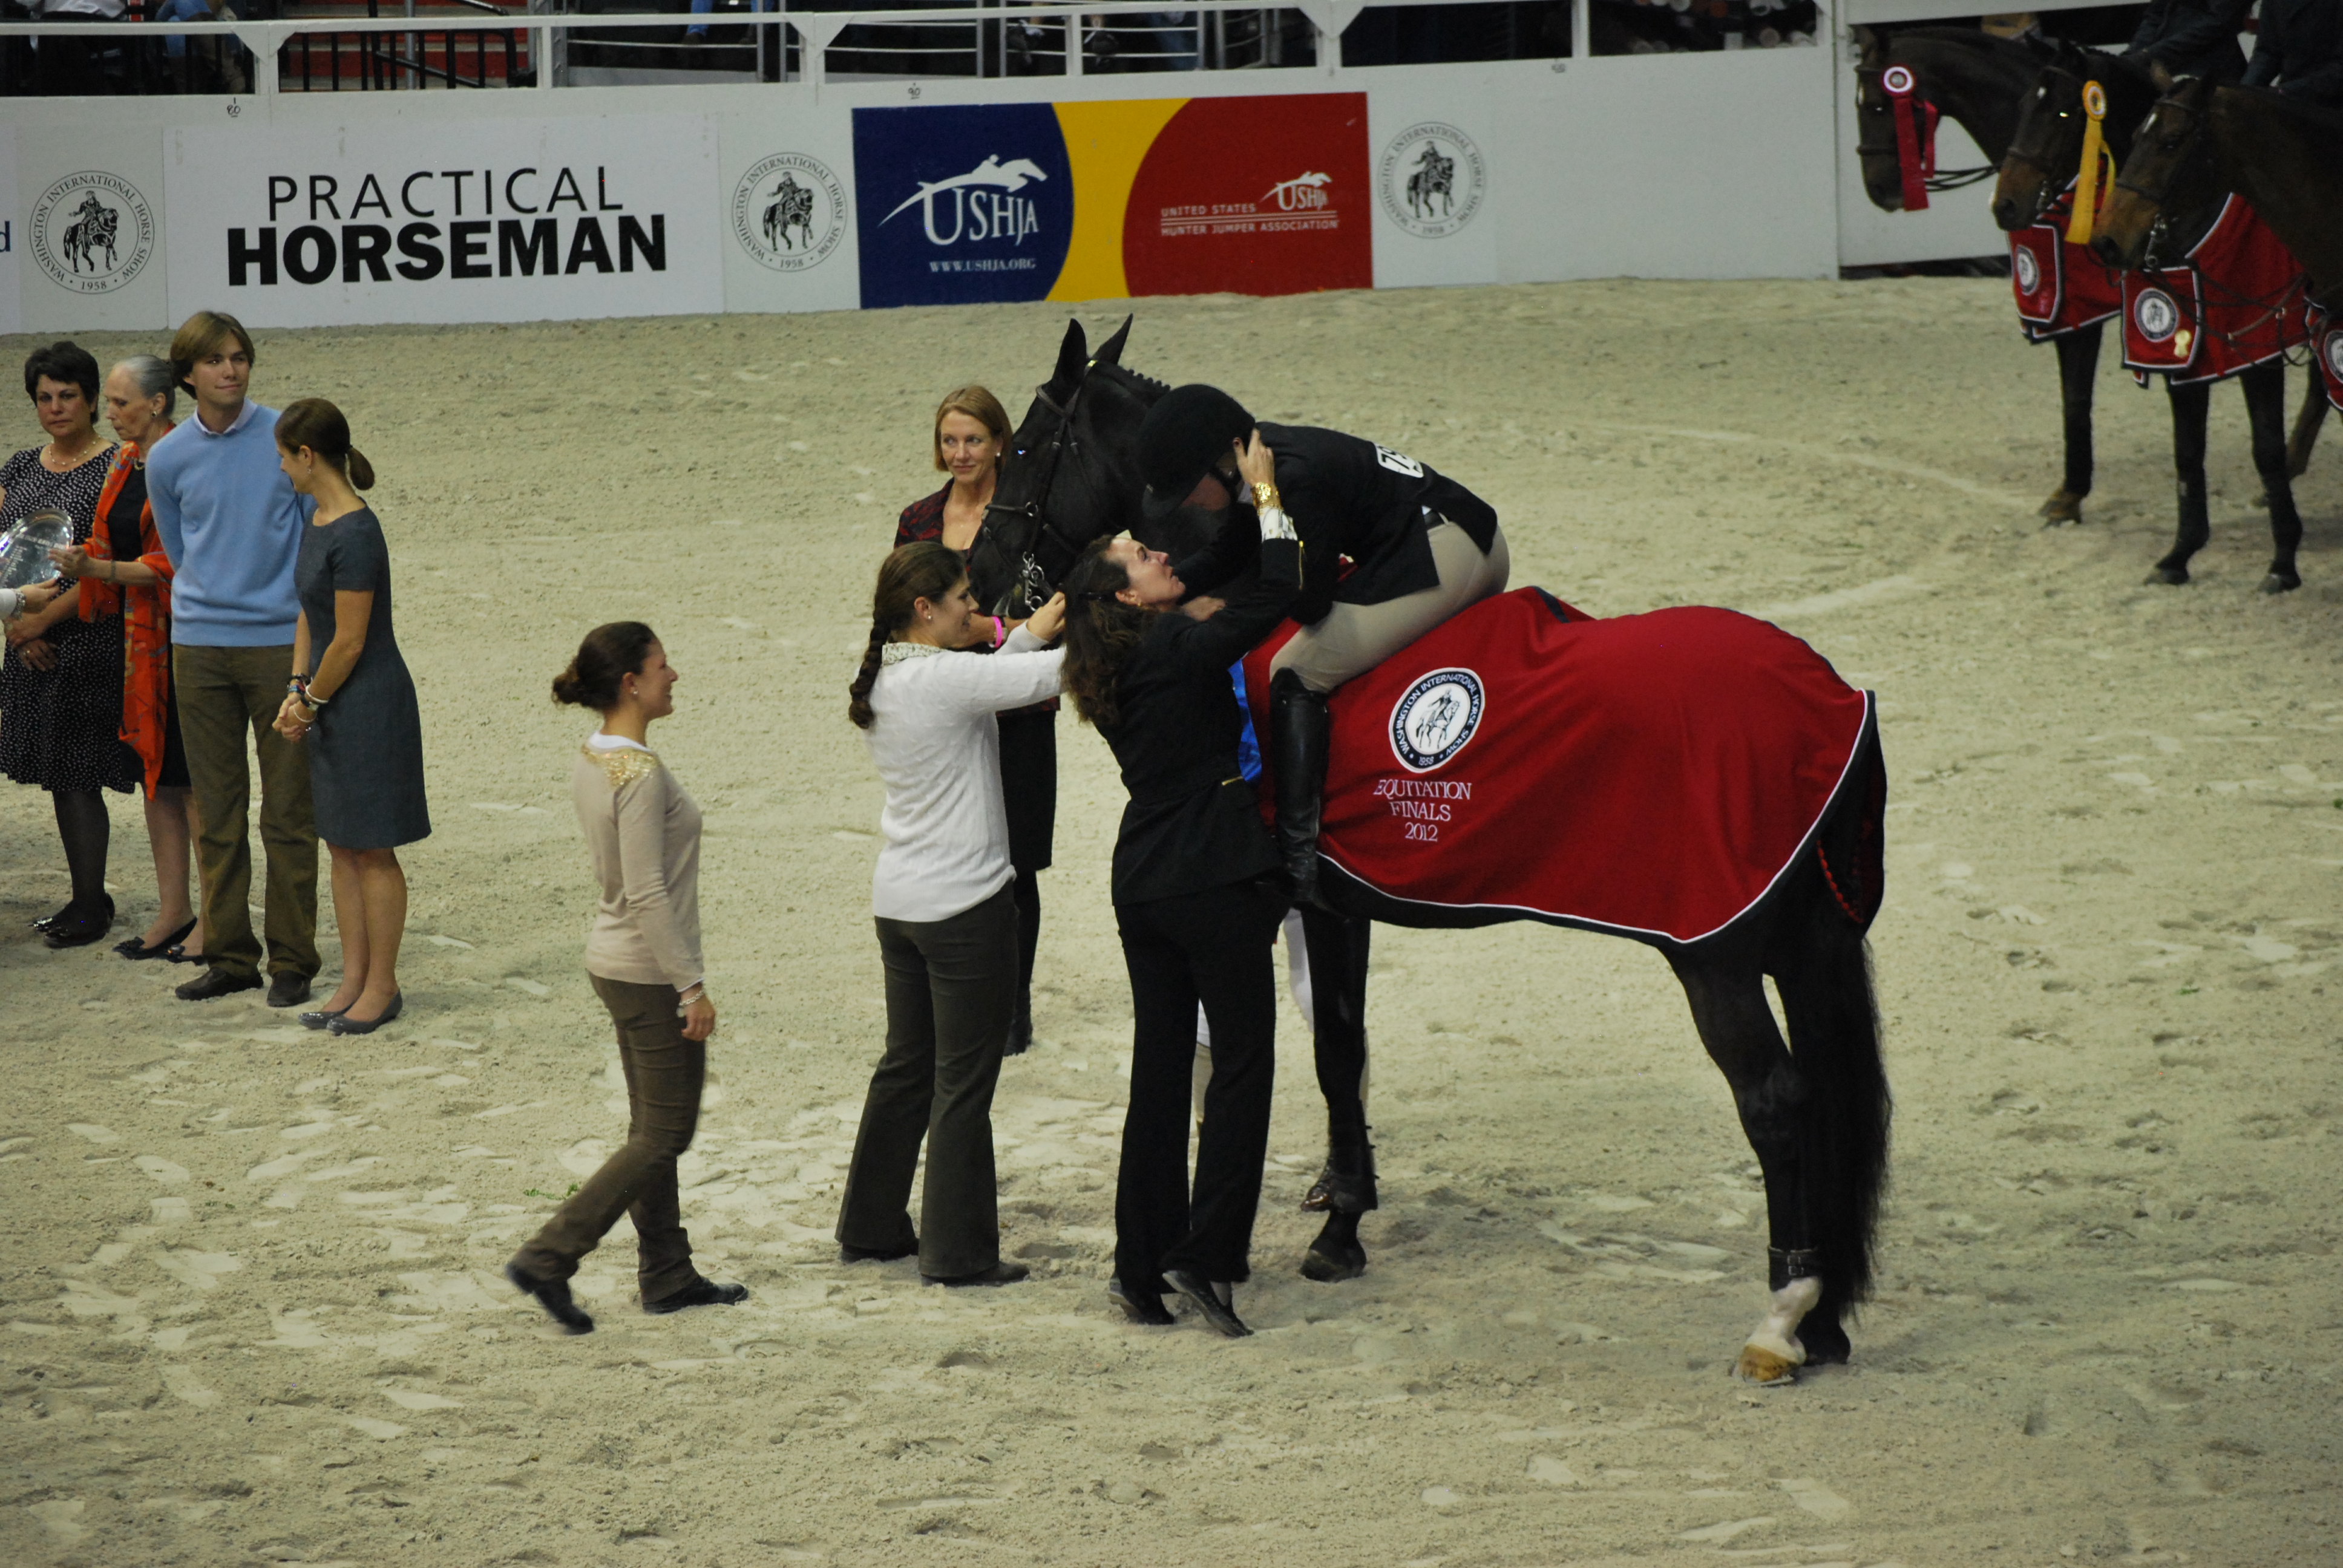 Last Saturday Night at the WIHS